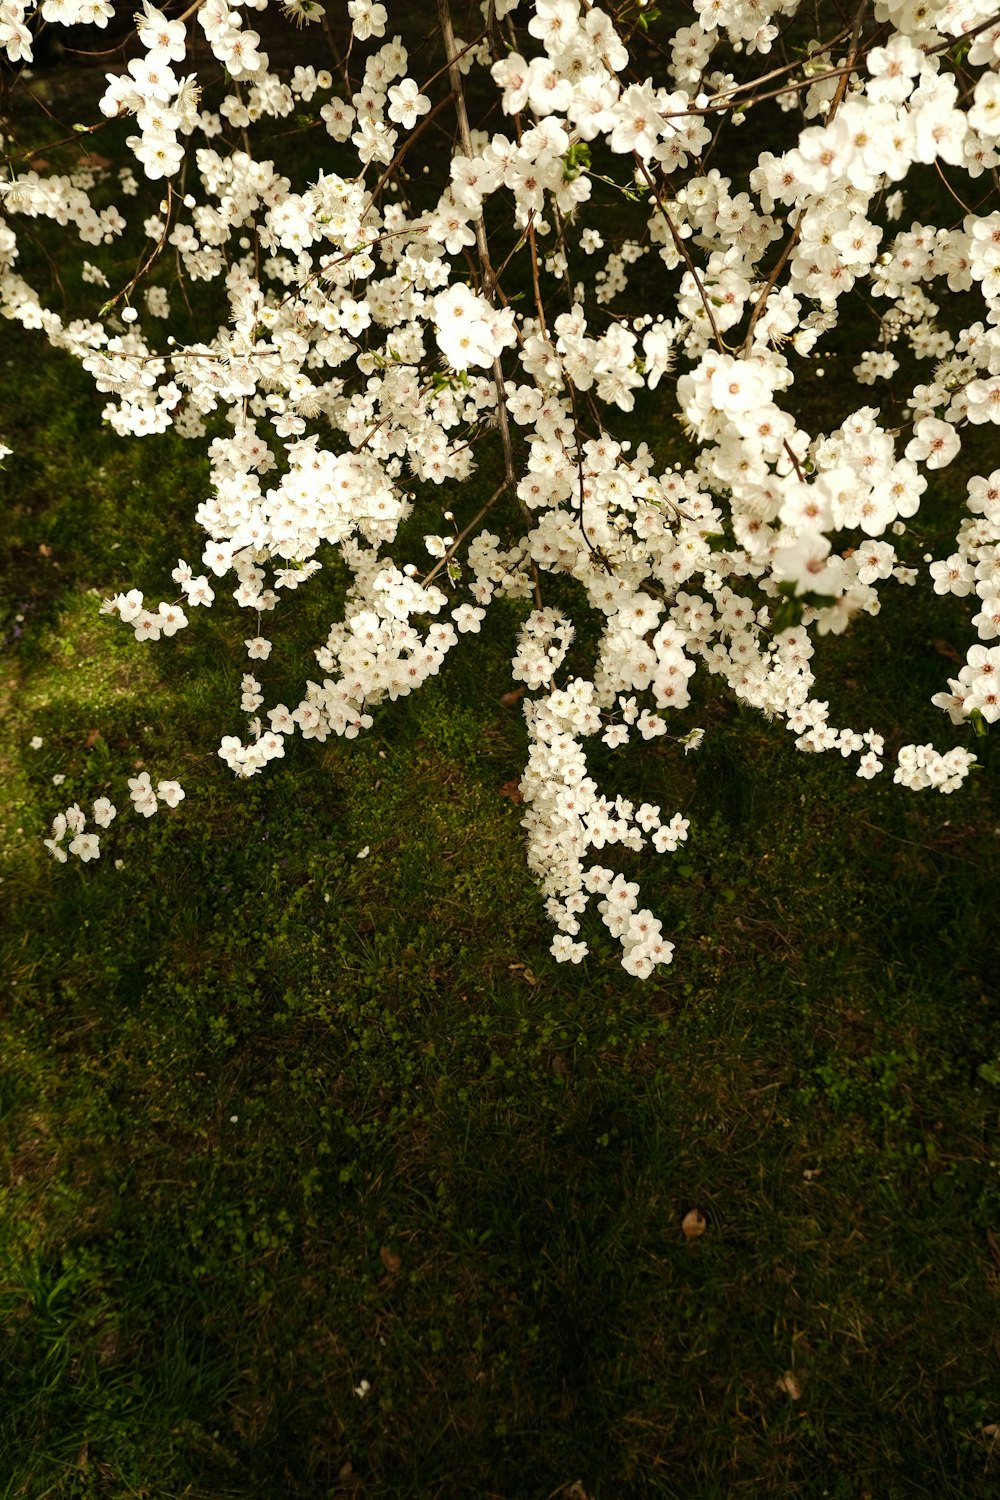 a tree with white flowers in a grassy area